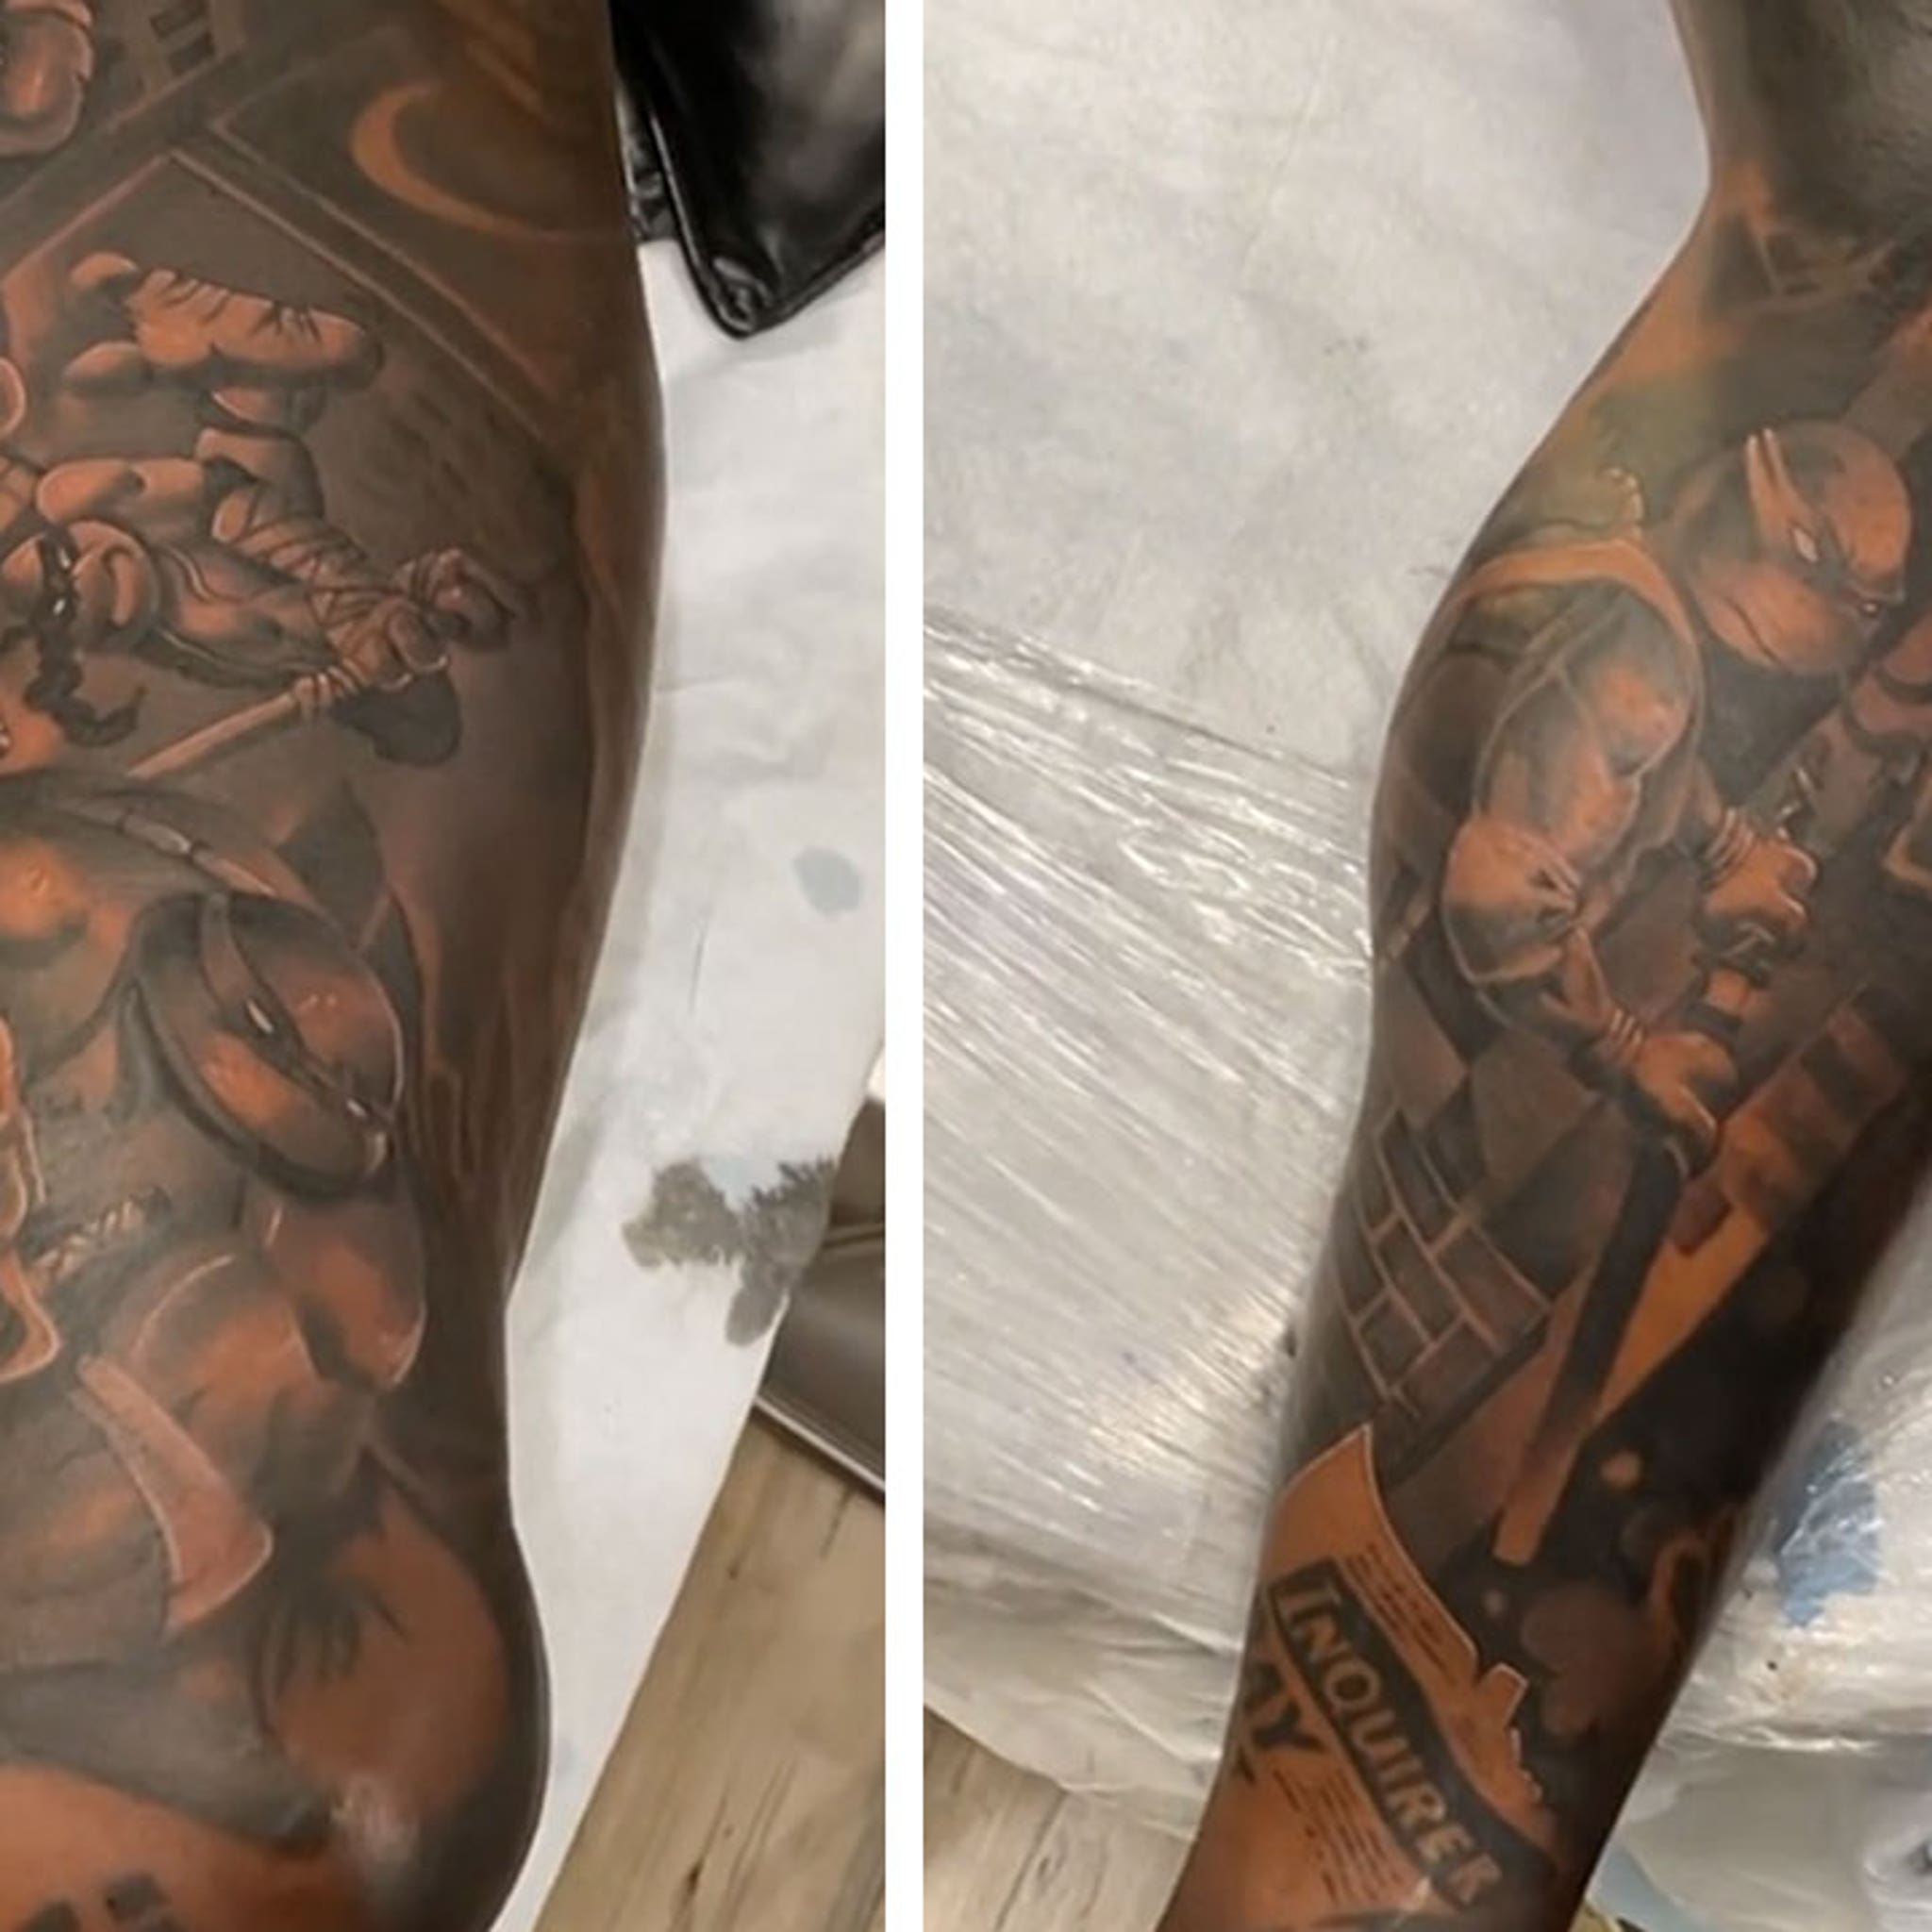 Progress of a sleeve done by rodmaztattt in Mexico City Mexico at burial  art gallery  rtattoo